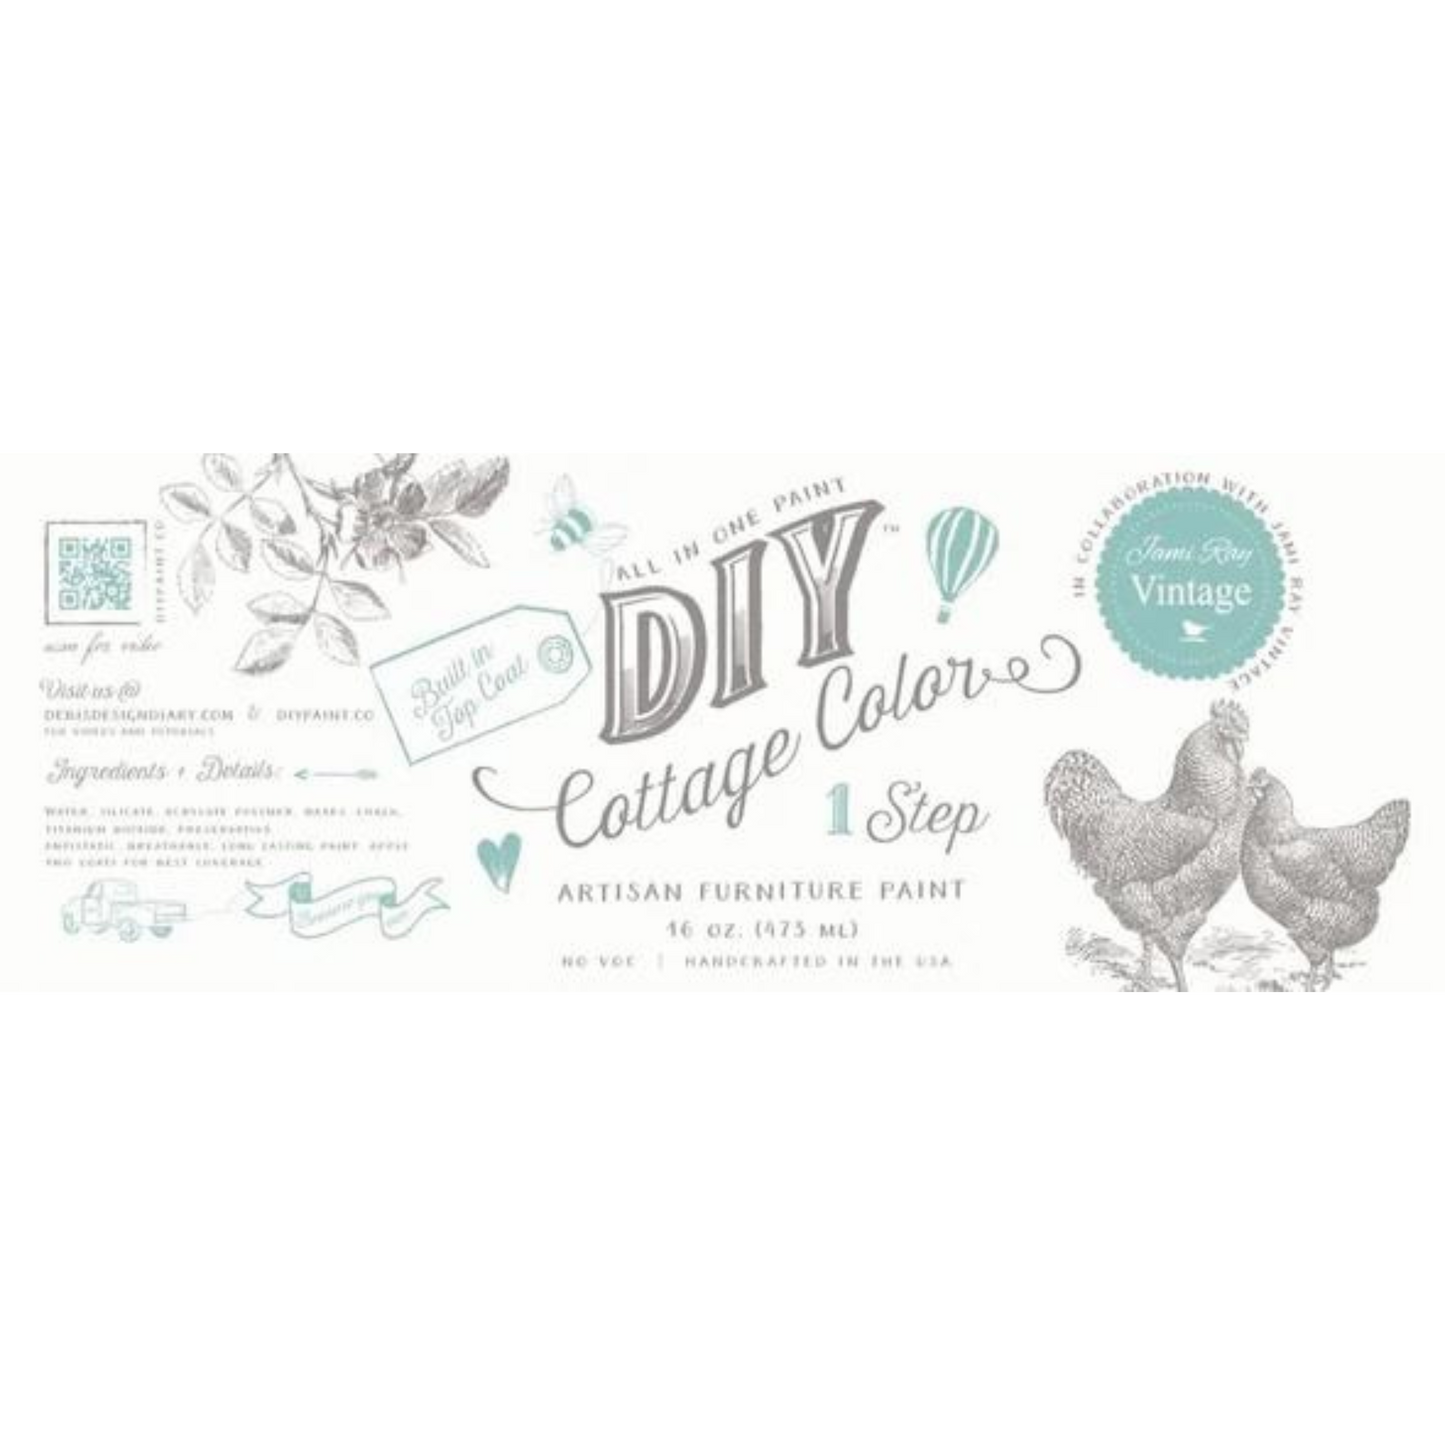 DIY Cottage Color Paint curated by Jamie Ray Vintage. Label product detail. Available in pints at Milton's Daughter.